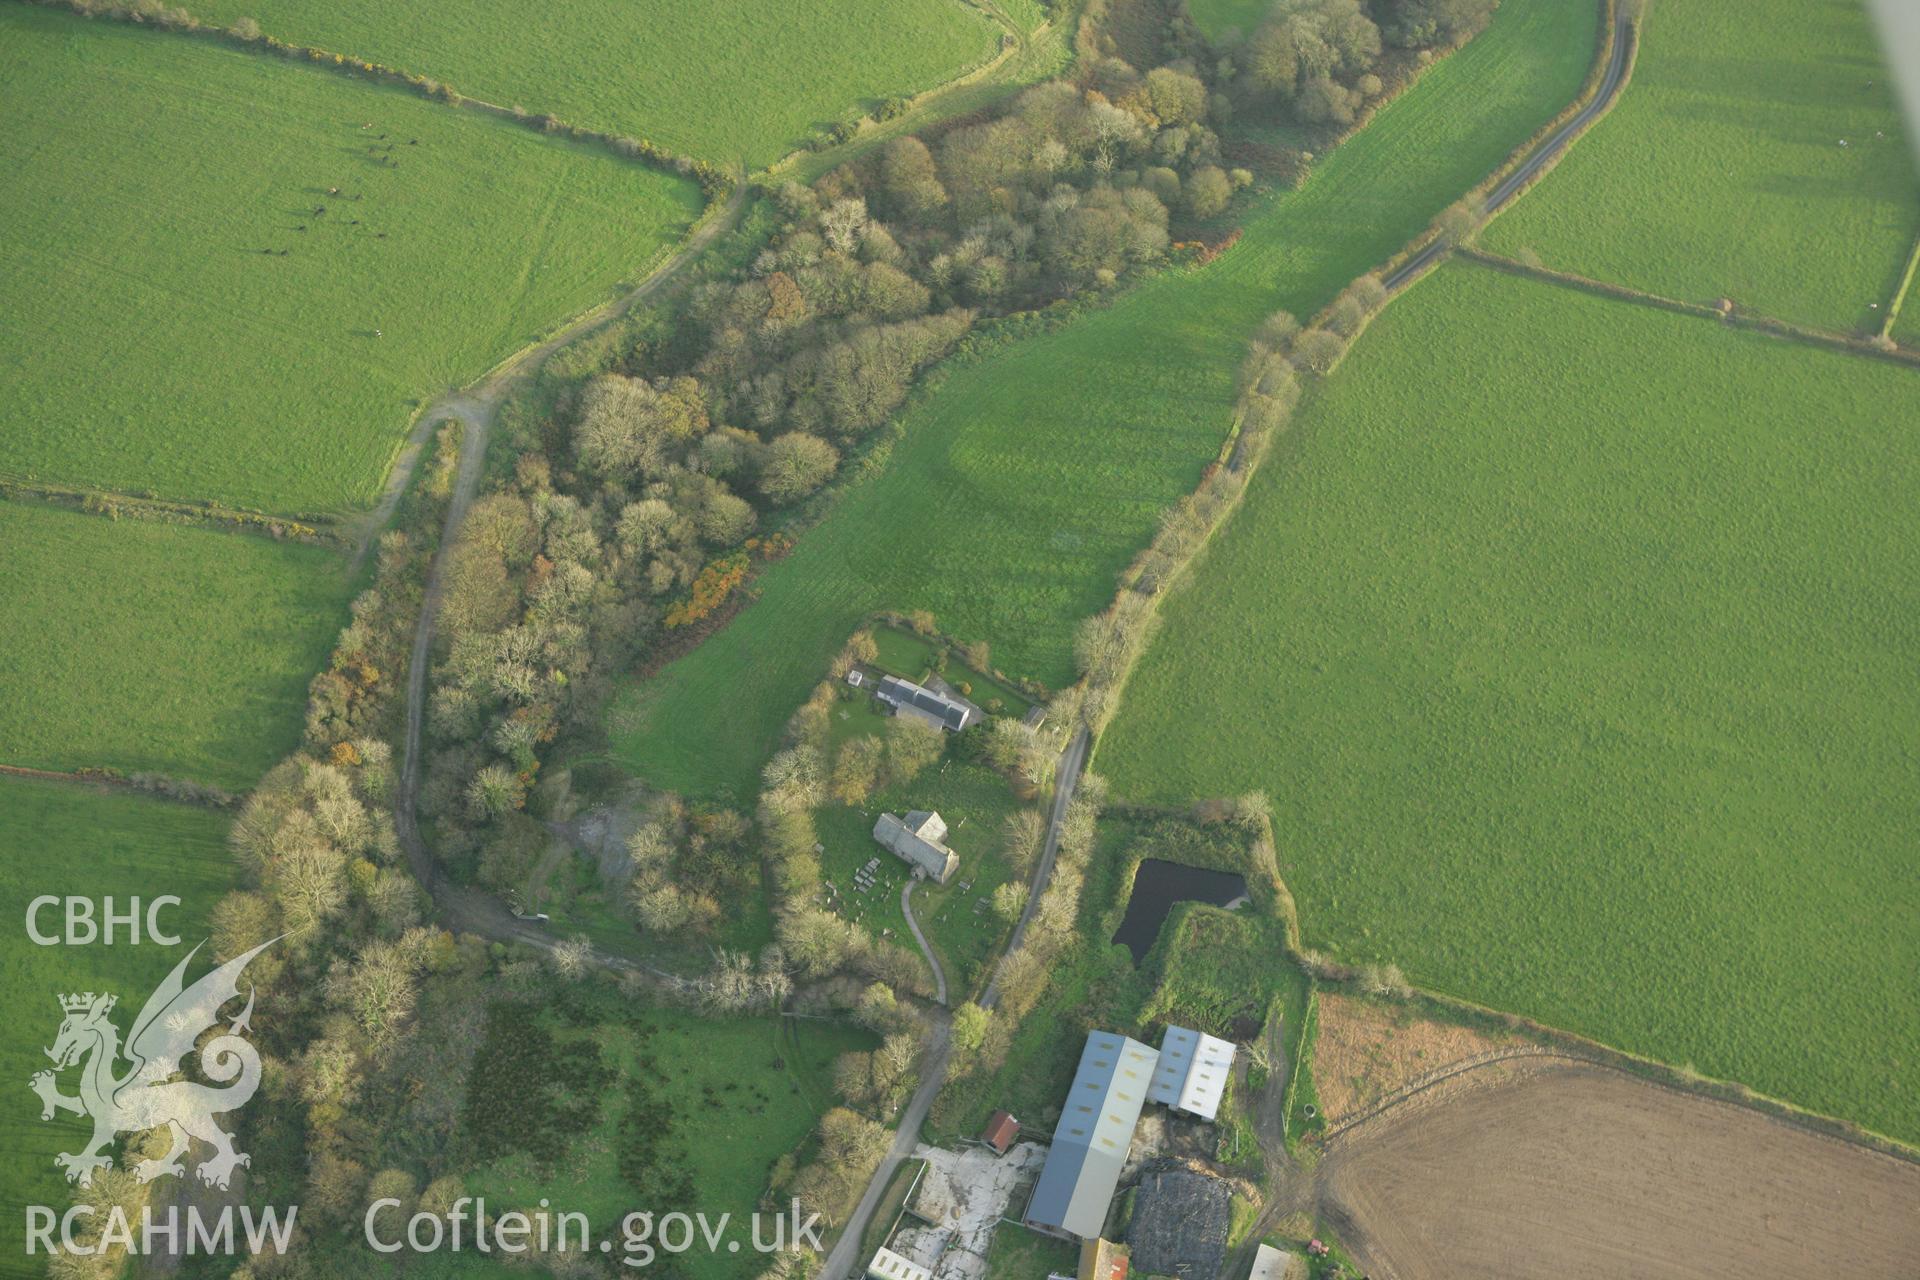 RCAHMW colour oblique photograph of Henry's Moat;Castell Hendre. Taken by Toby Driver on 06/11/2007.